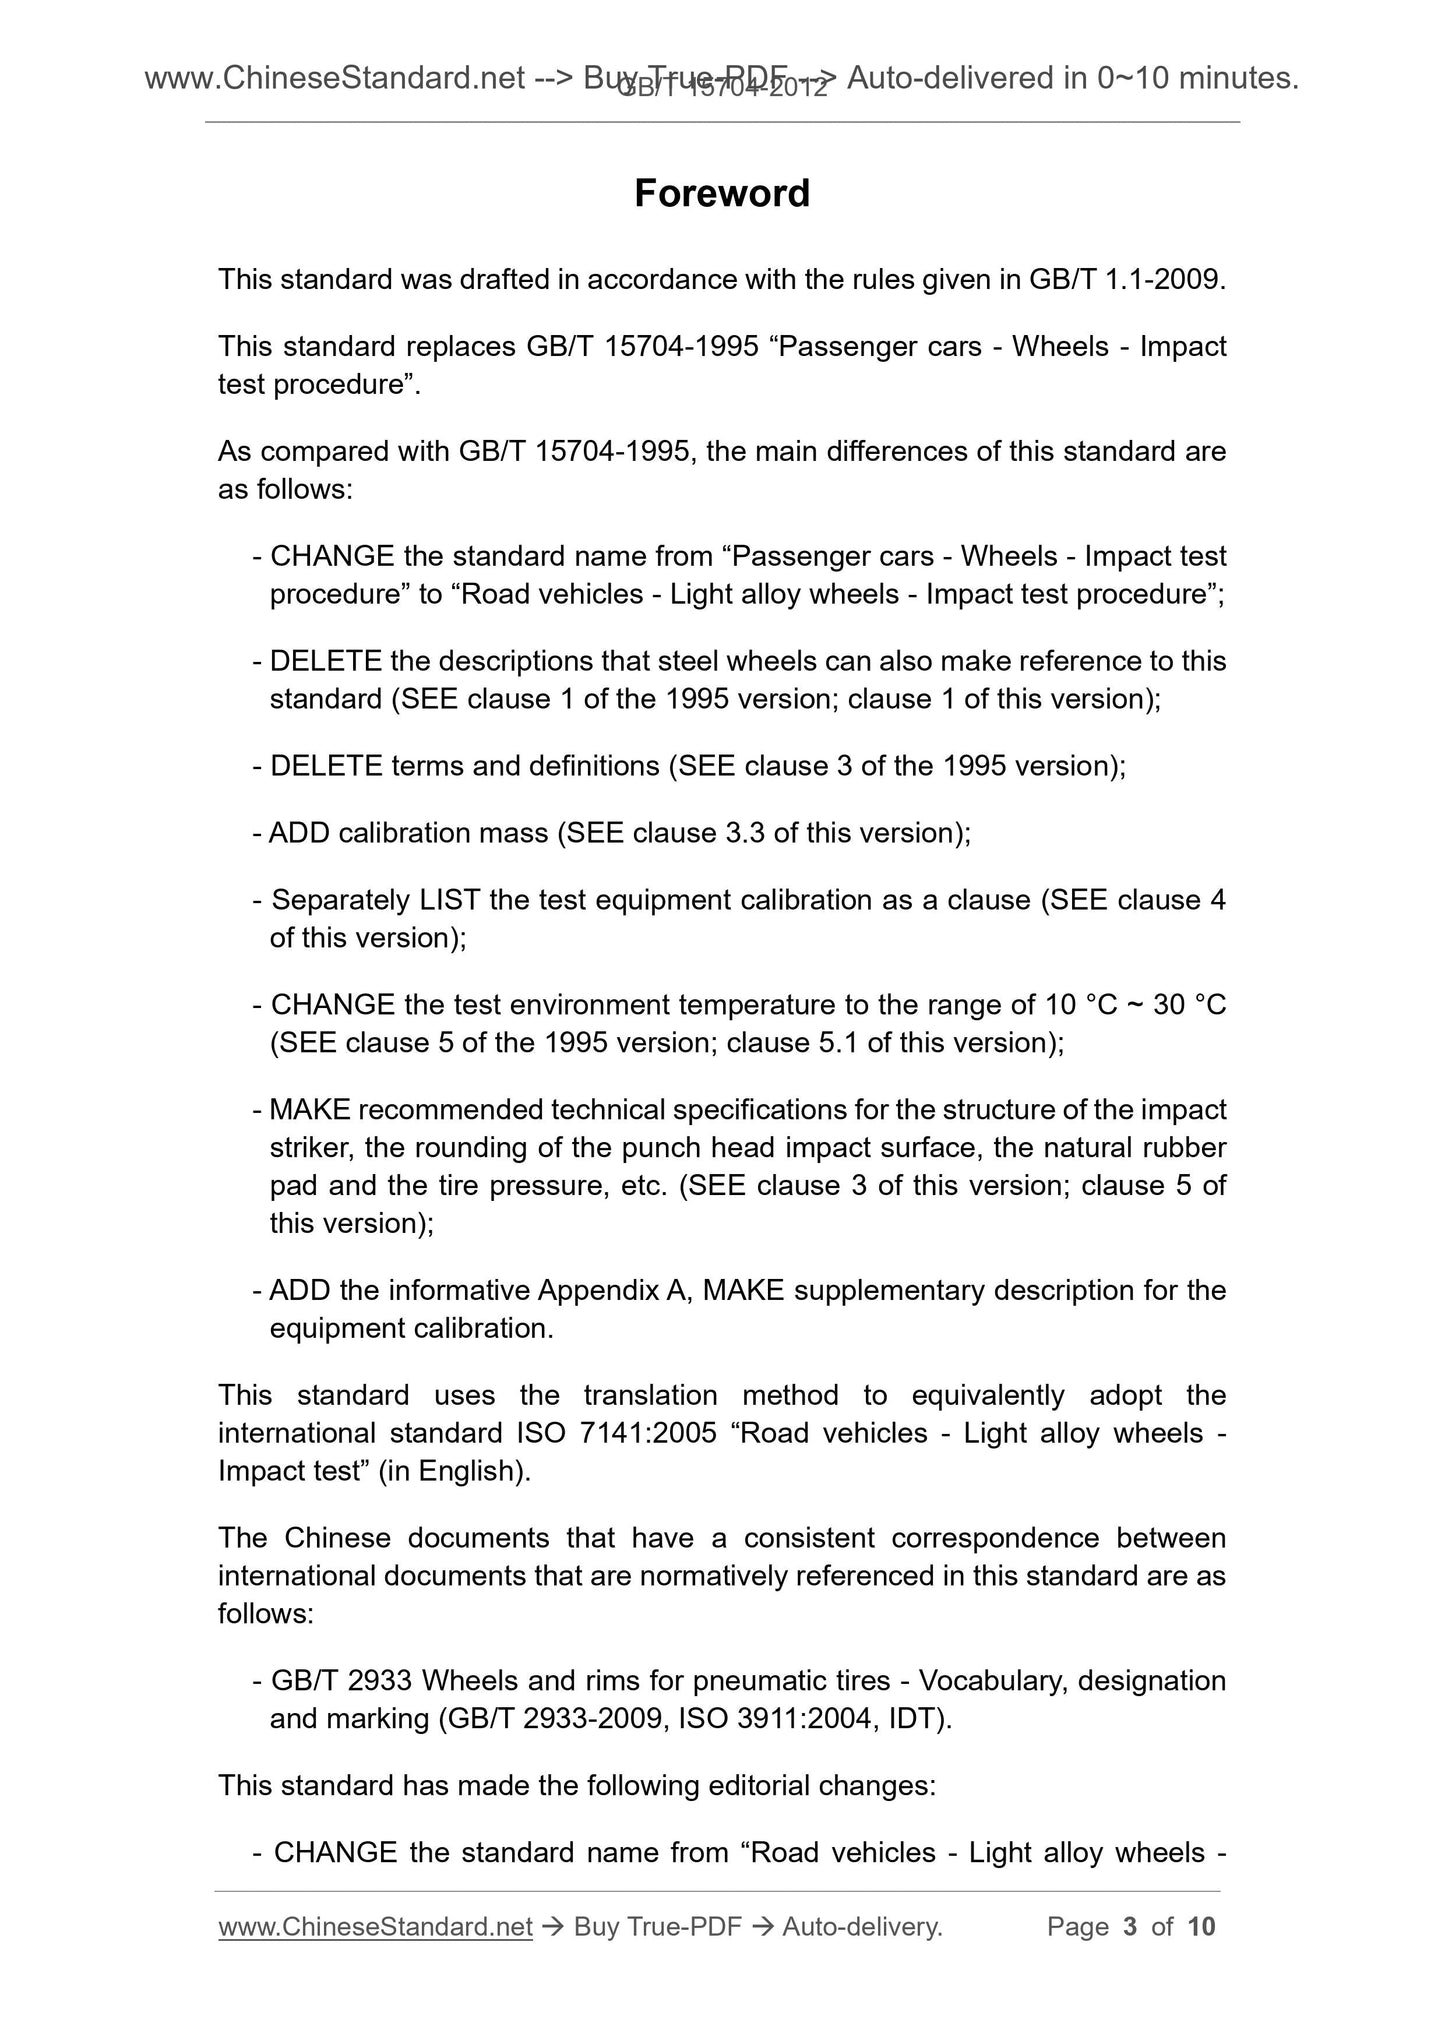 GB/T 15704-2012 Page 3